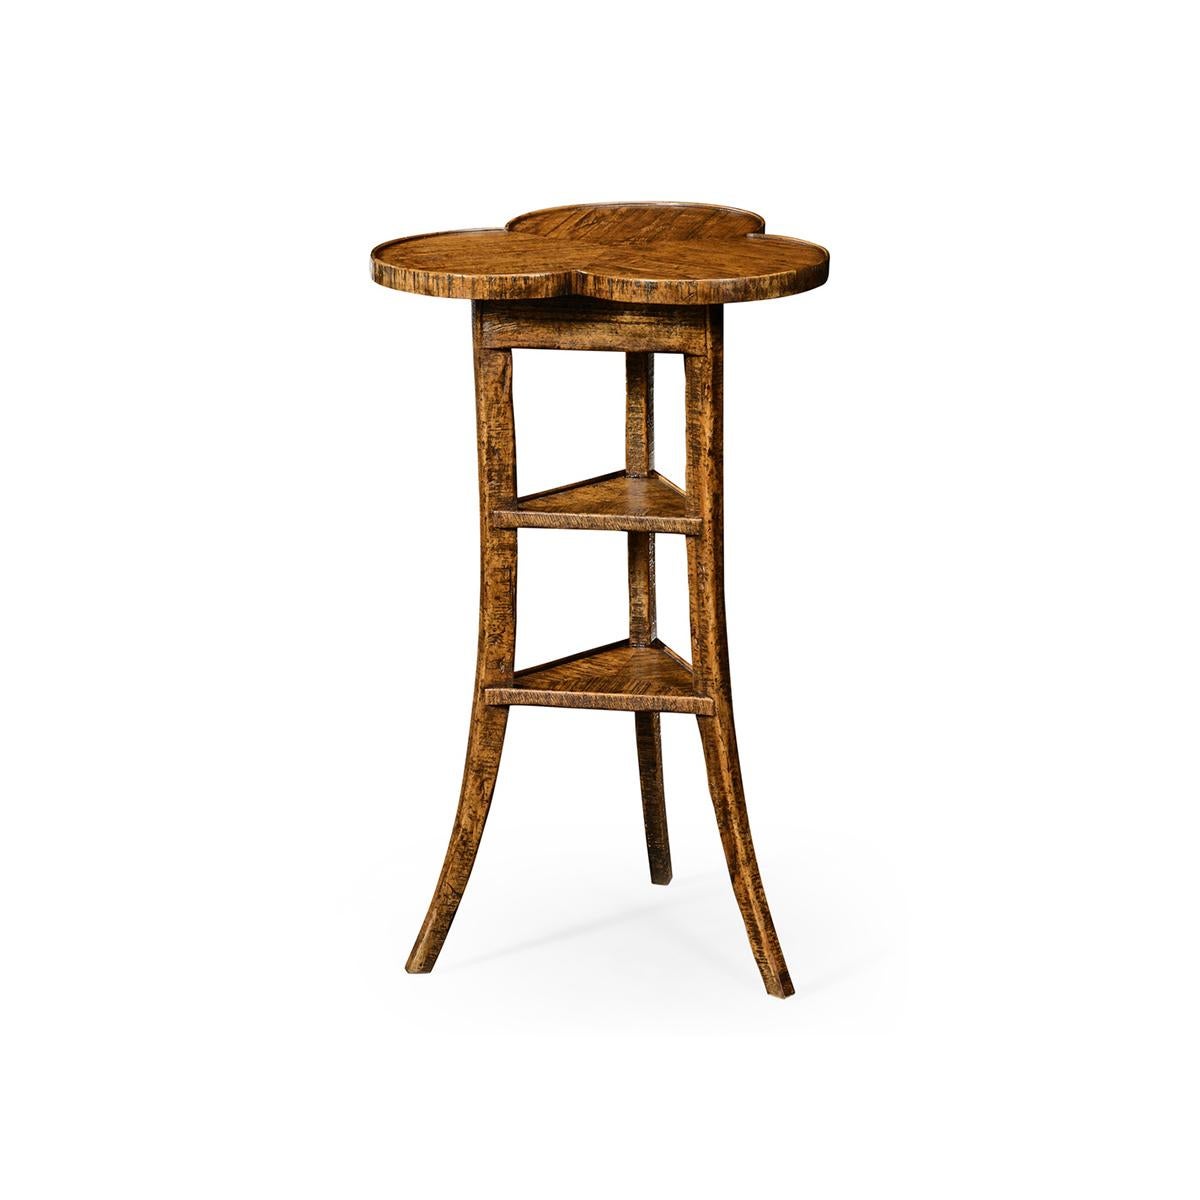 Trefoil Three-Tier Side Table, a heavily distressed side table with a trefoil top mounted on three splayed legs around two triangular shelves in a country walnut finish.

Dimensions: 16